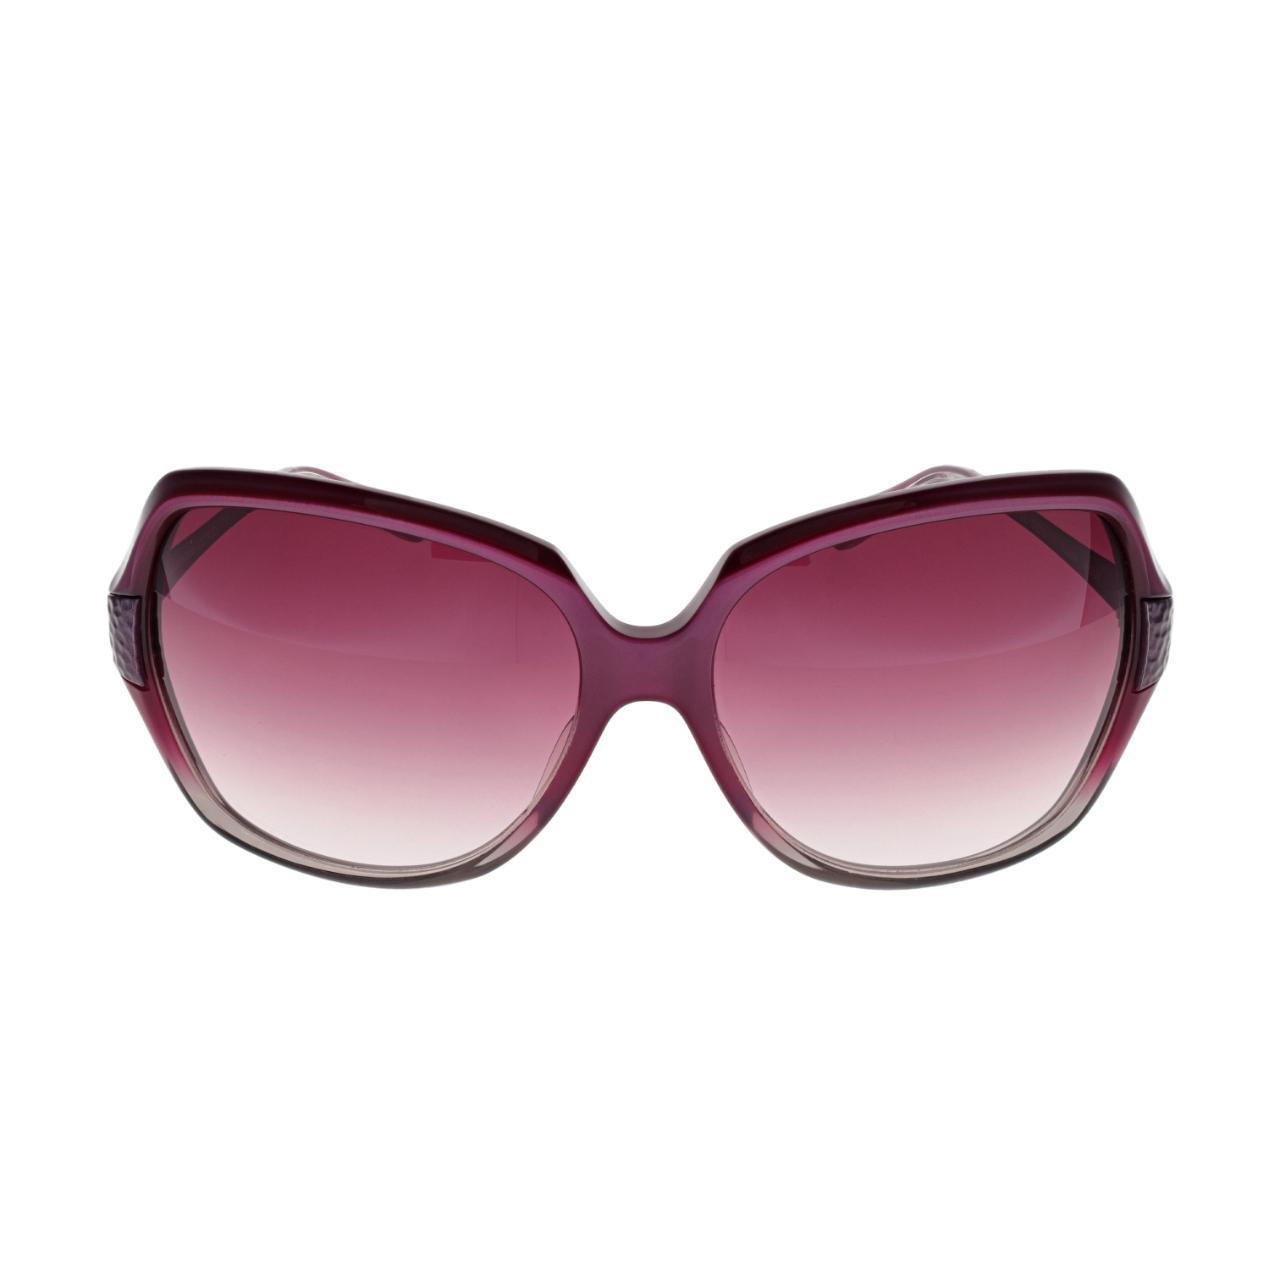 Oliver Peoples Women's Burgundy and Purple Sunglasses (2)